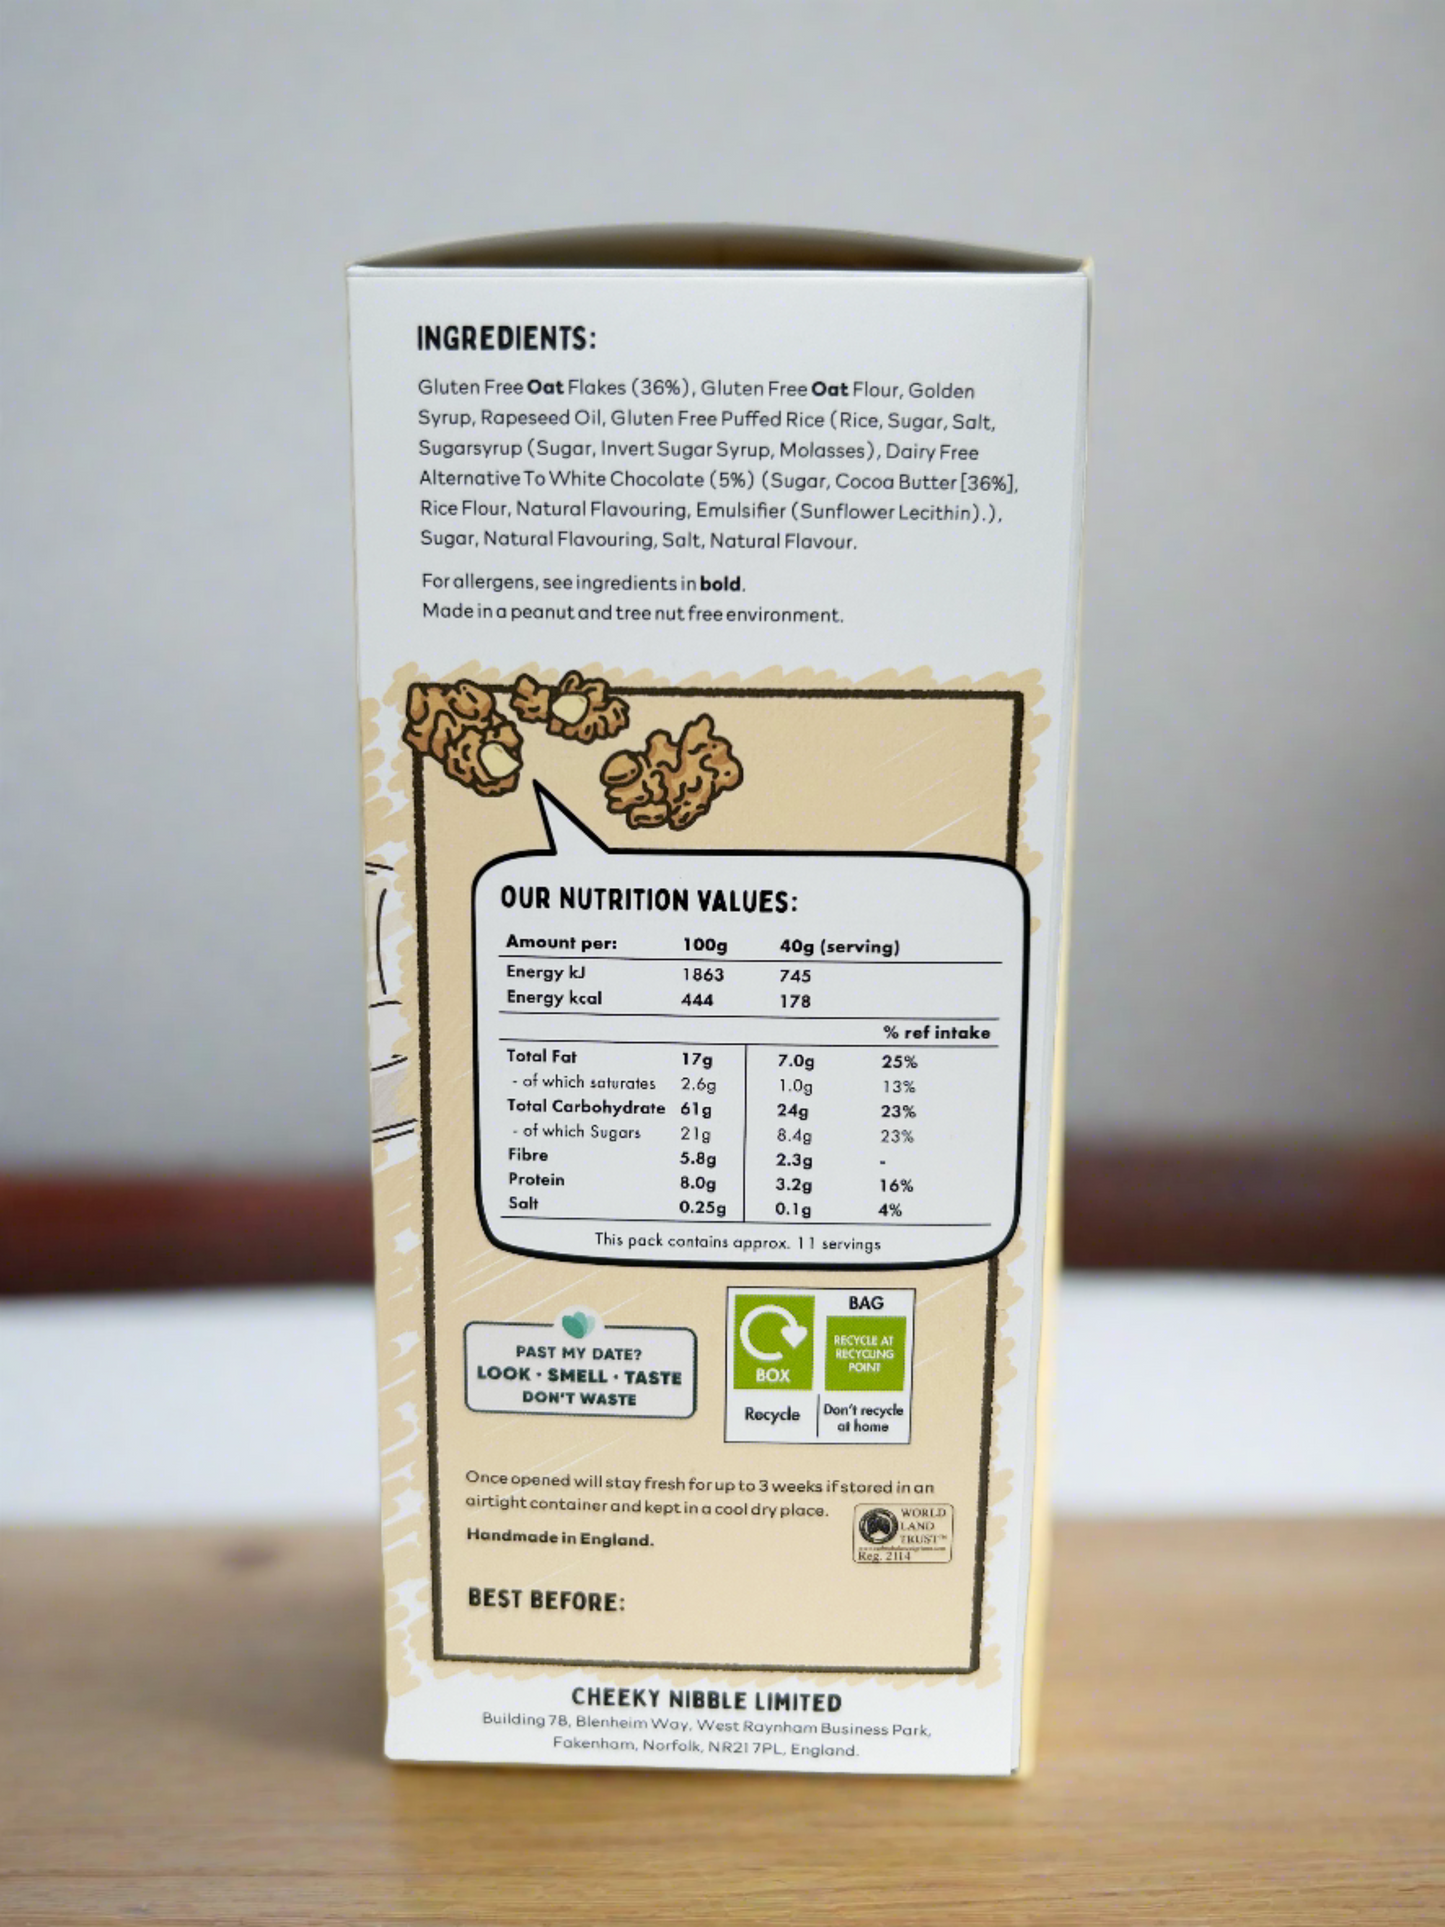 The cereal box prominently displays nutritional information for Vanilla Latte flavored granola. Clear text indicates serving size, calorie count, macronutrient breakdown (including protein, fat, and carbohydrates), and essential vitamins and minerals. The background of the box may include imagery evocative of a café setting, with steaming coffee cups and swirling latte art. The text is legible and concise, providing consumers with vital dietary details for making informed choices.